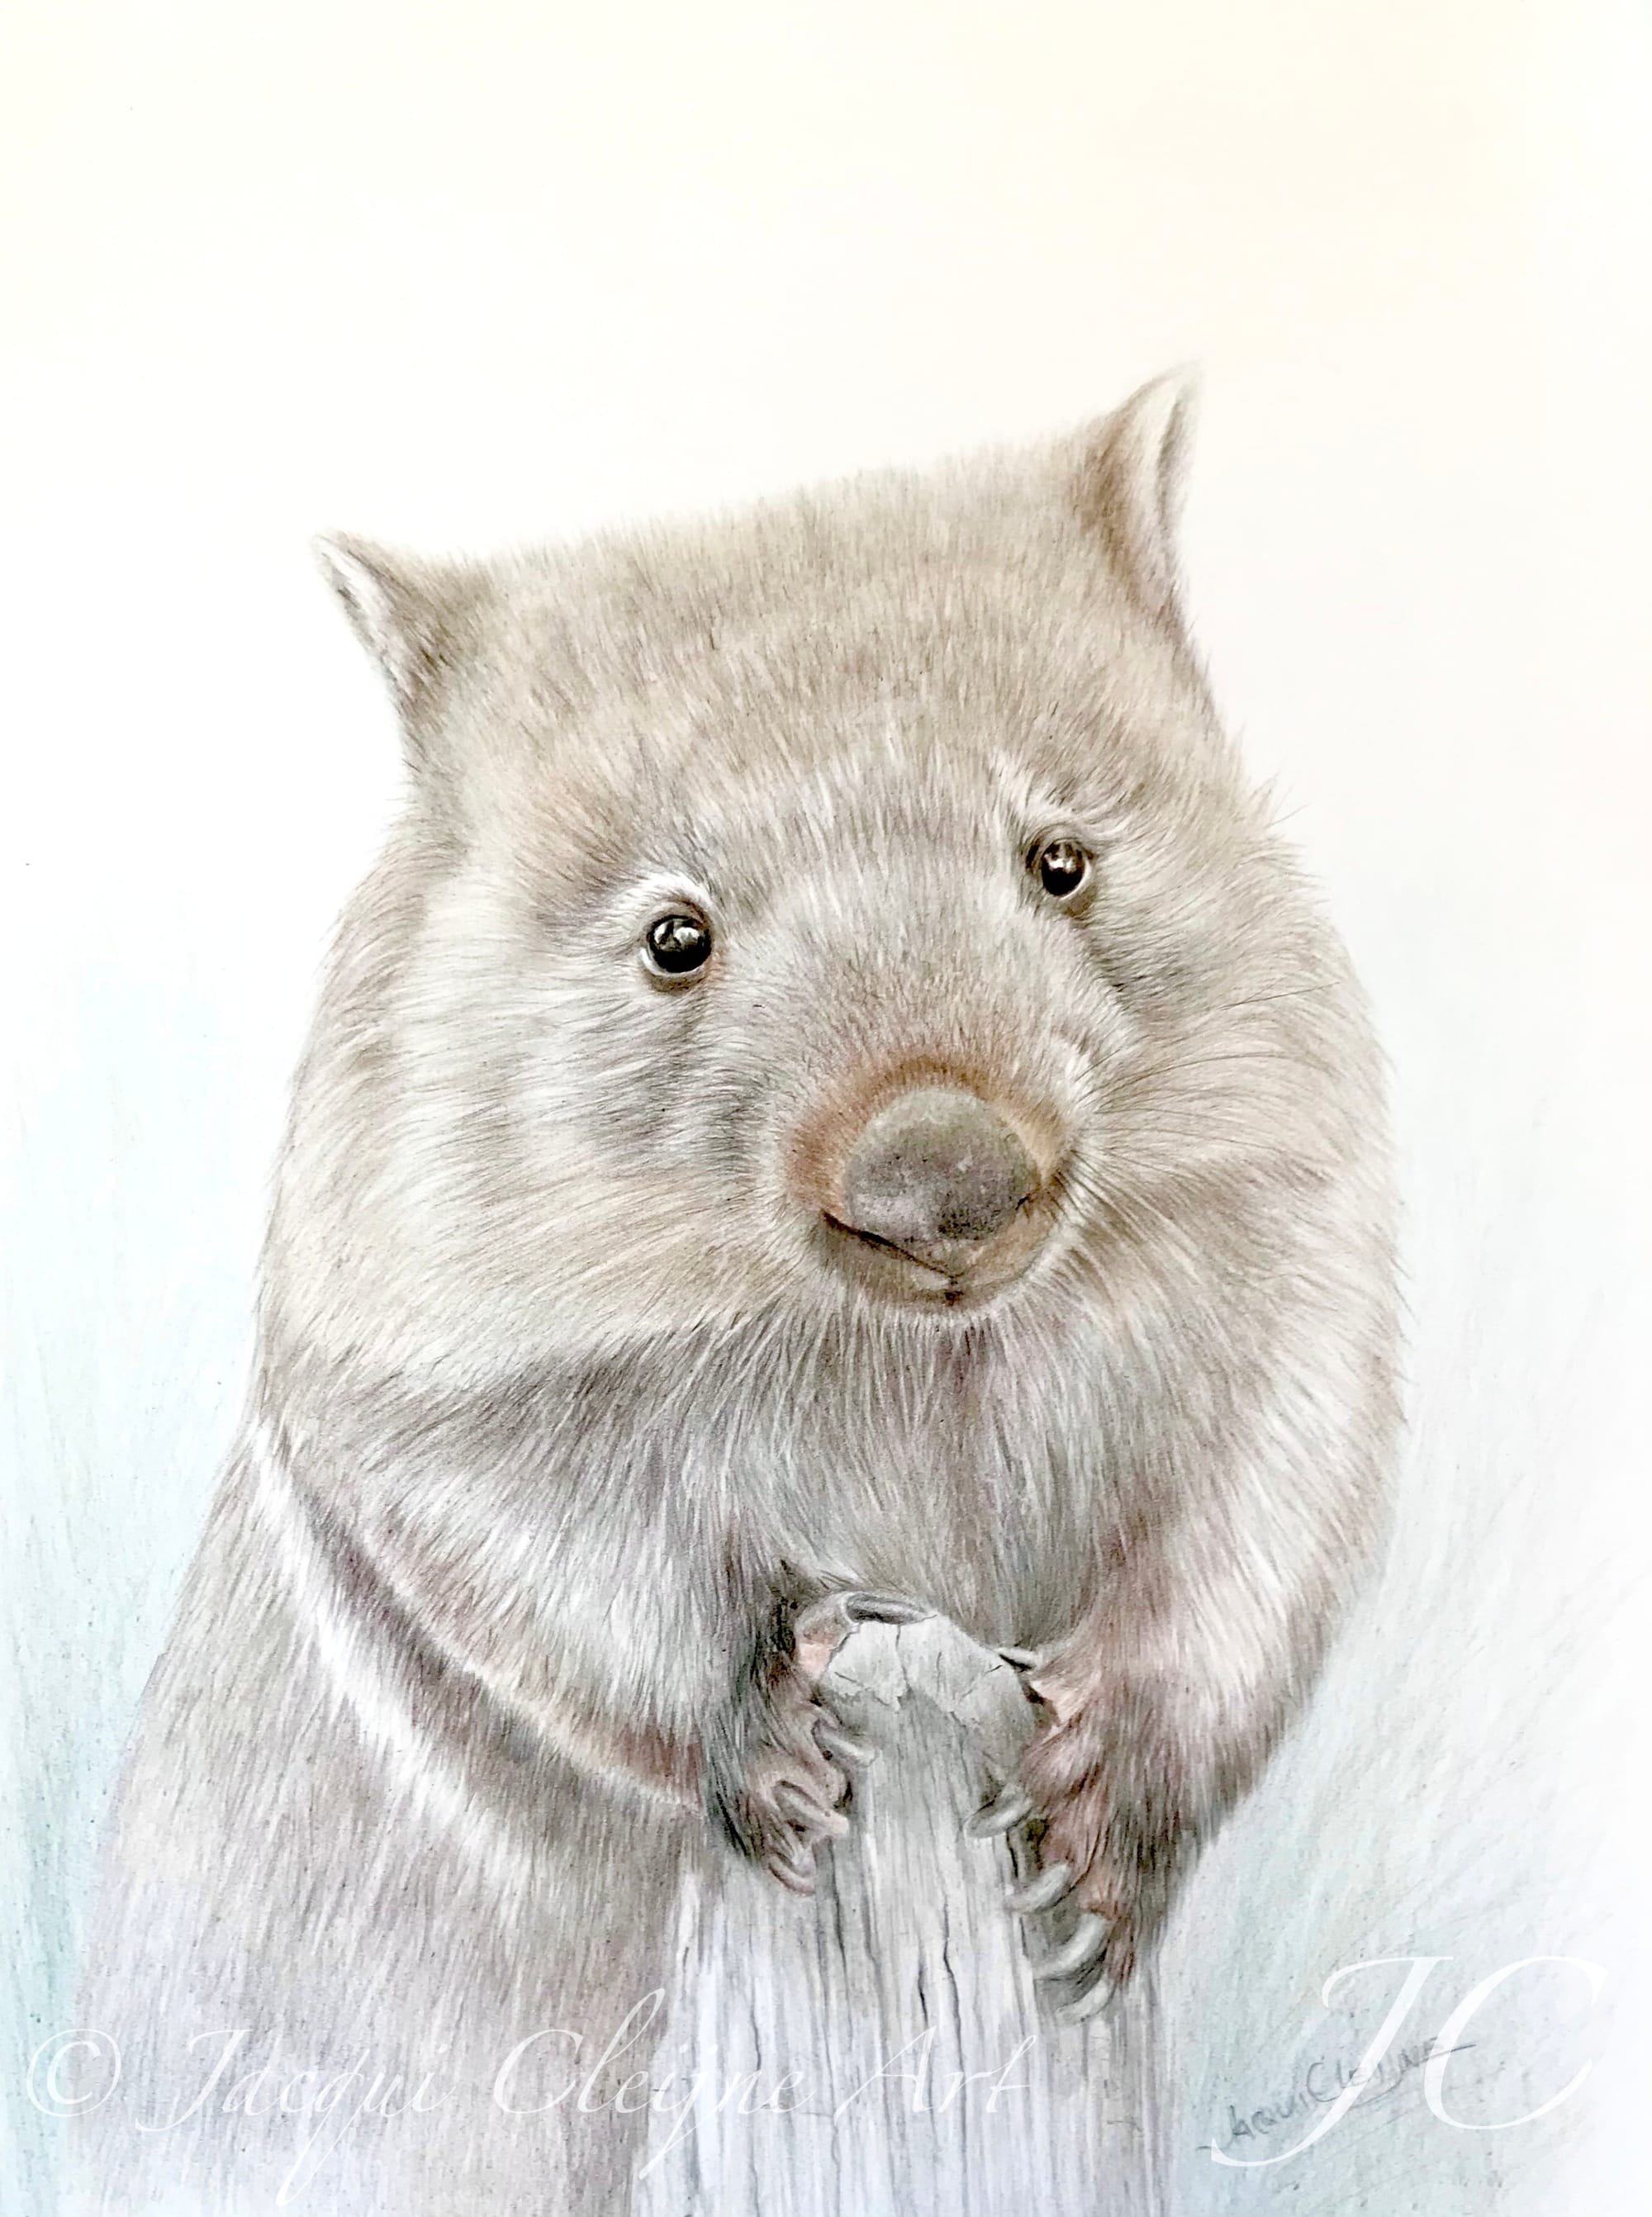 "G'Day Mate" - Tasmanian Wombat FOR SALE